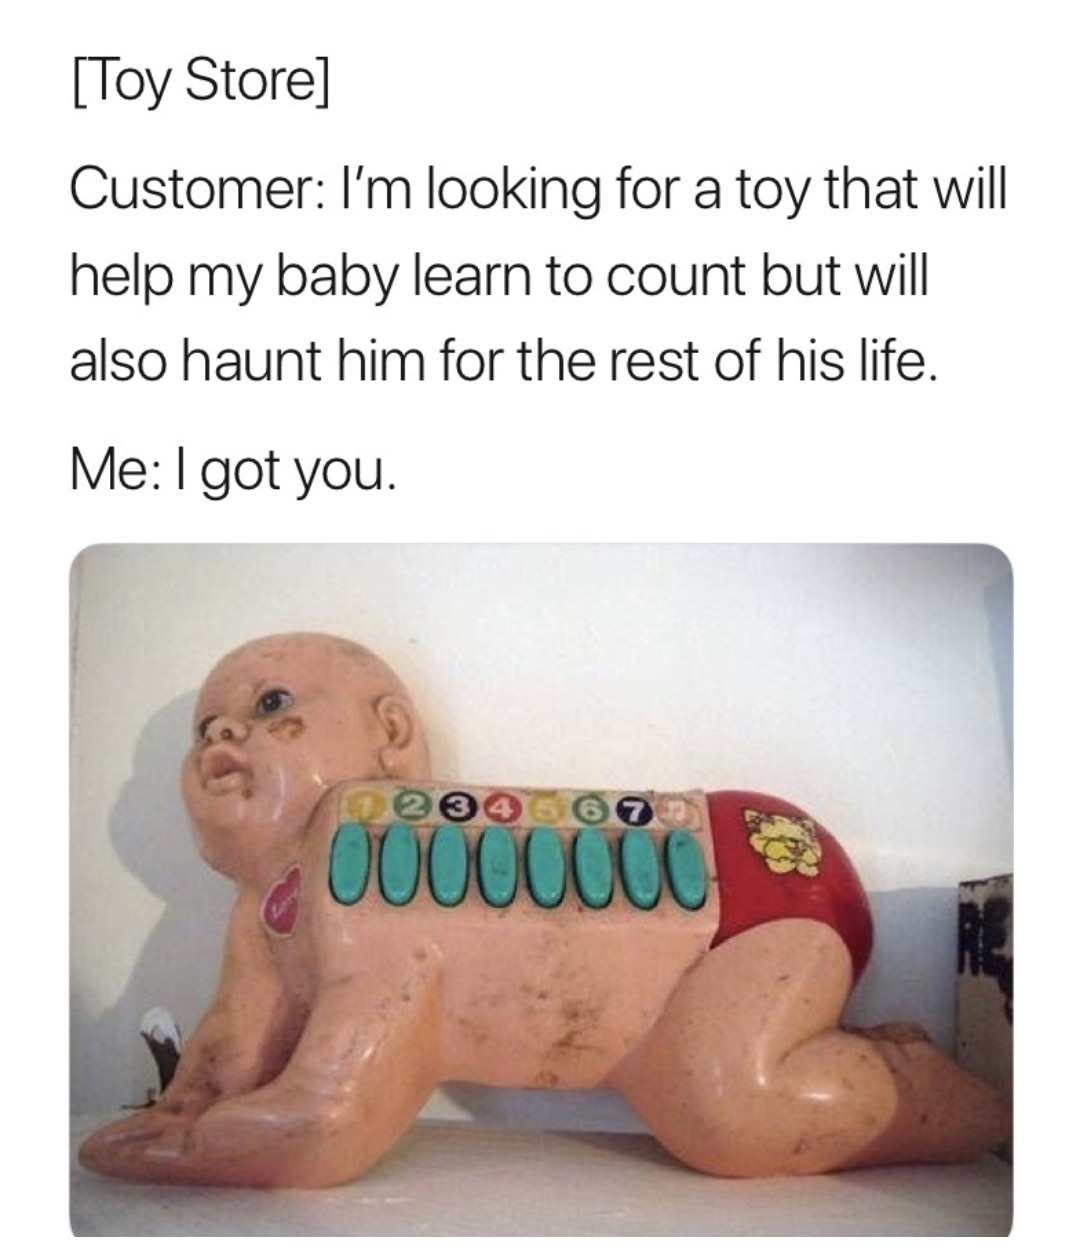 creepy toys from the 70s - Toy Store Customer I'm looking for a toy that will help my baby learn to count but will also haunt him for the rest of his life. Me I got you. Uuuuu